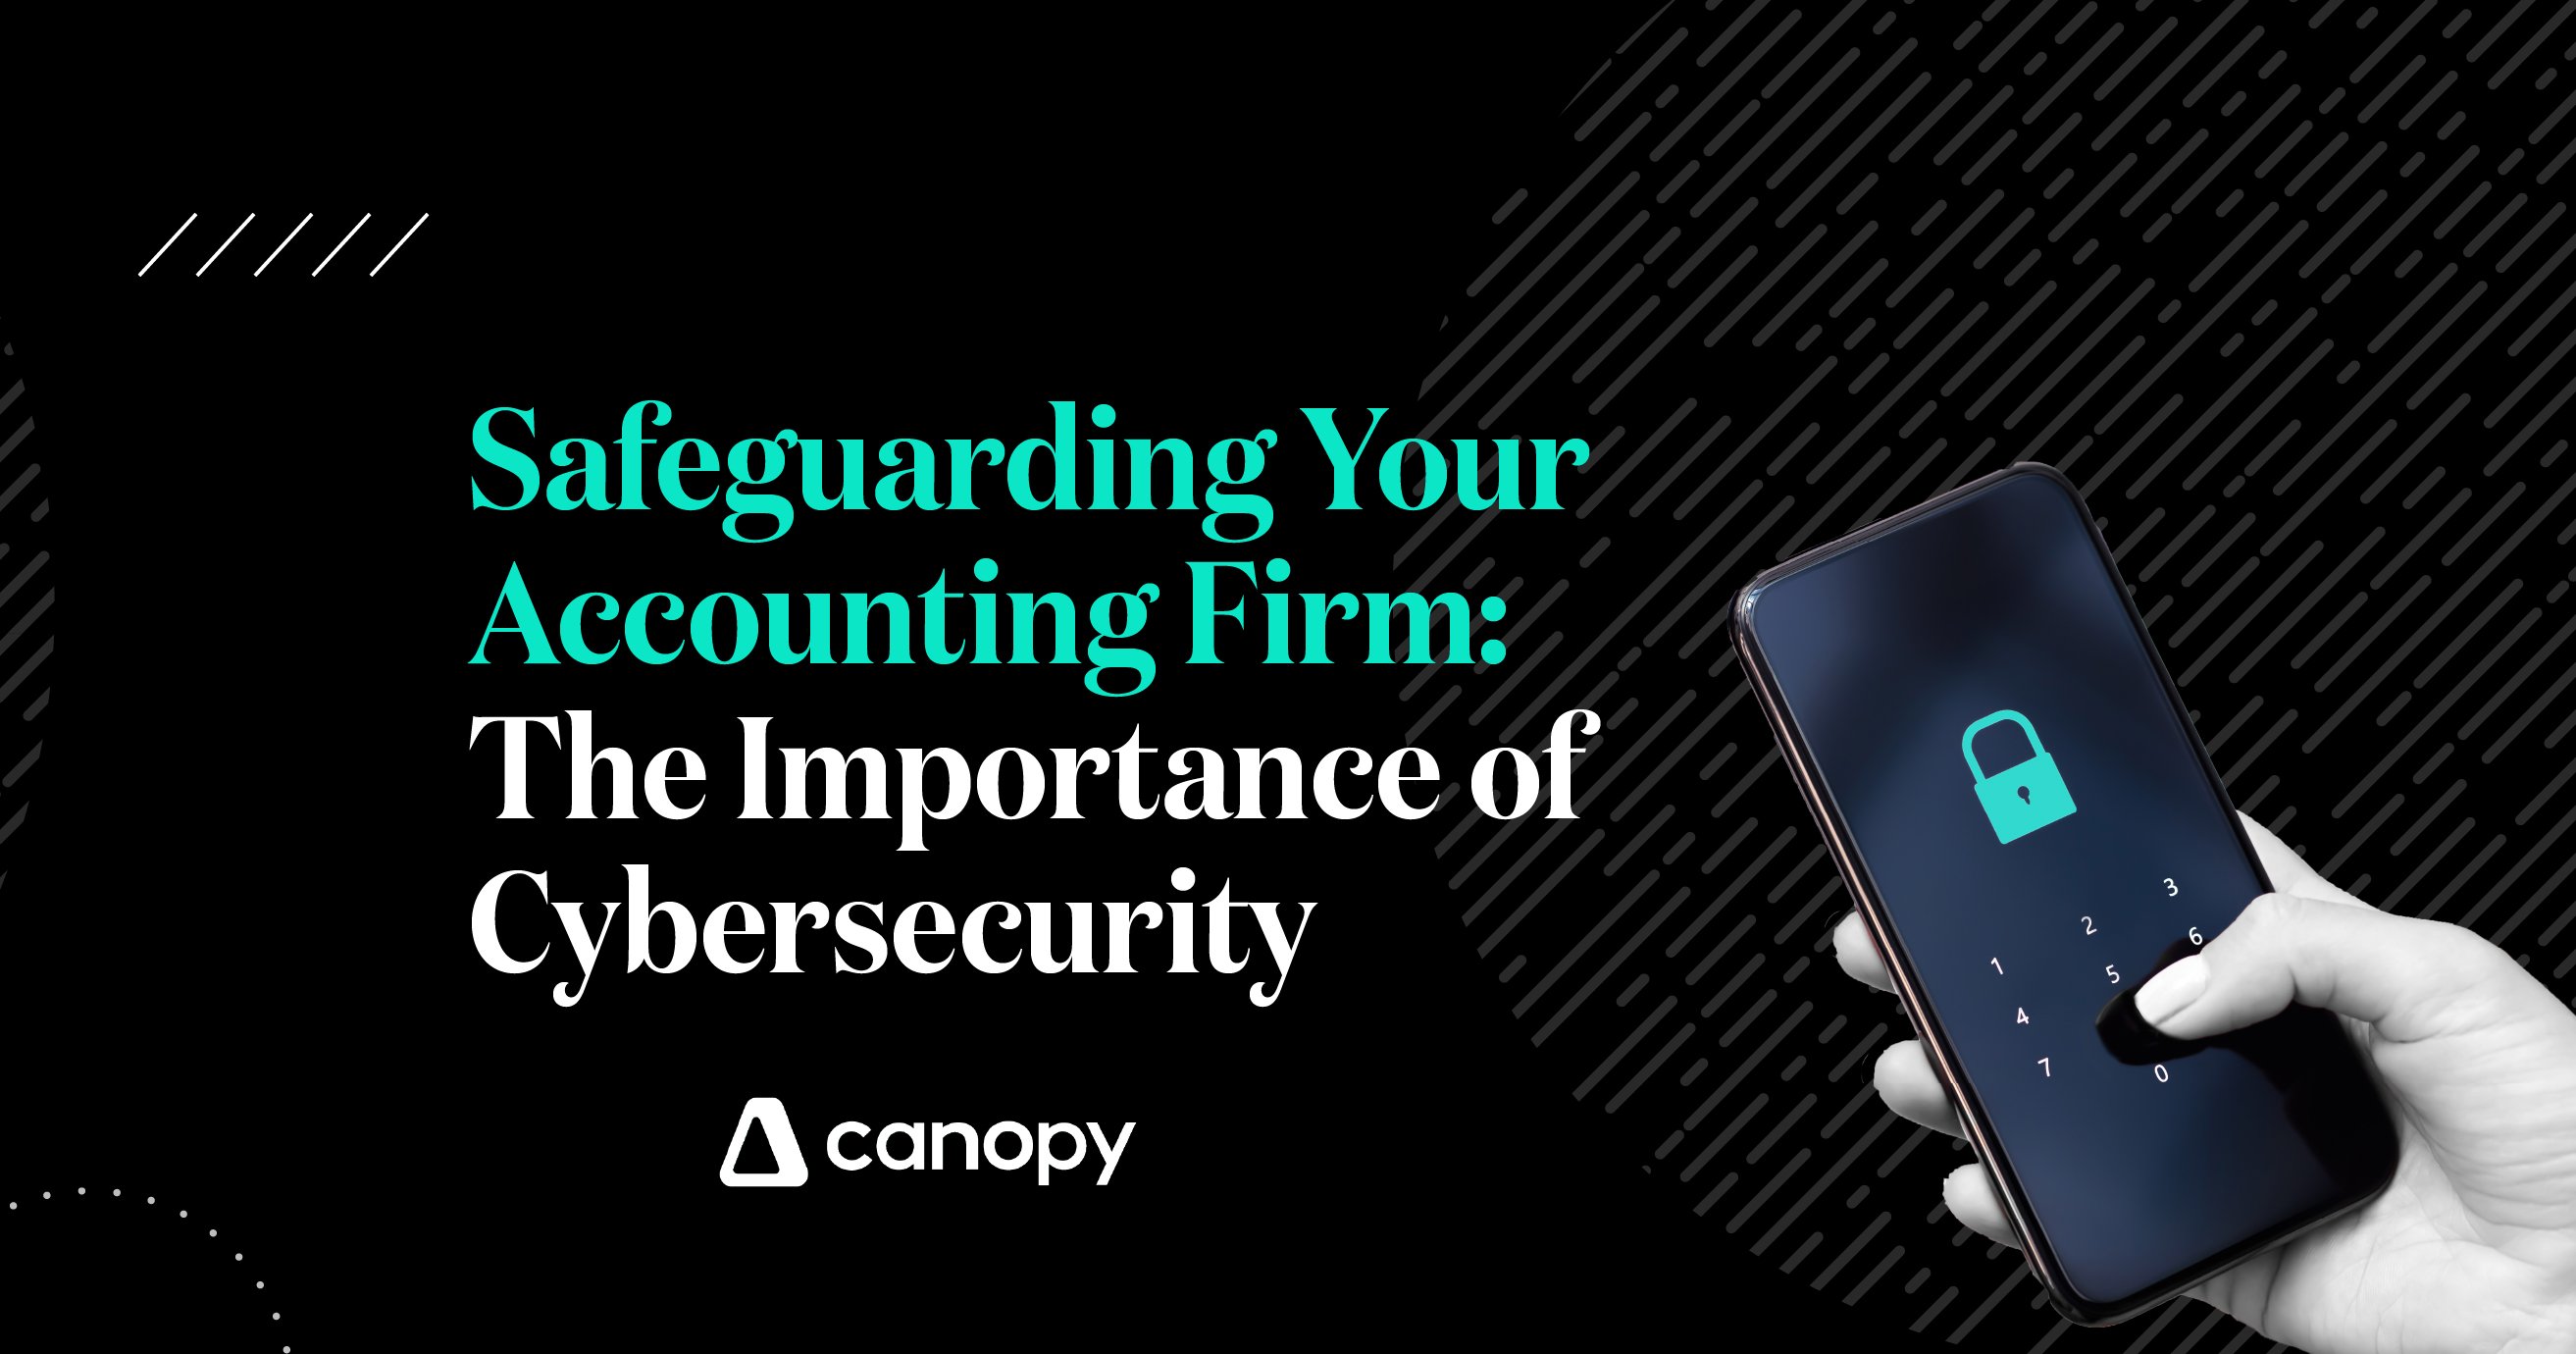 Safeguarding Your Accounting Firm: The Importance of Cybersecurity